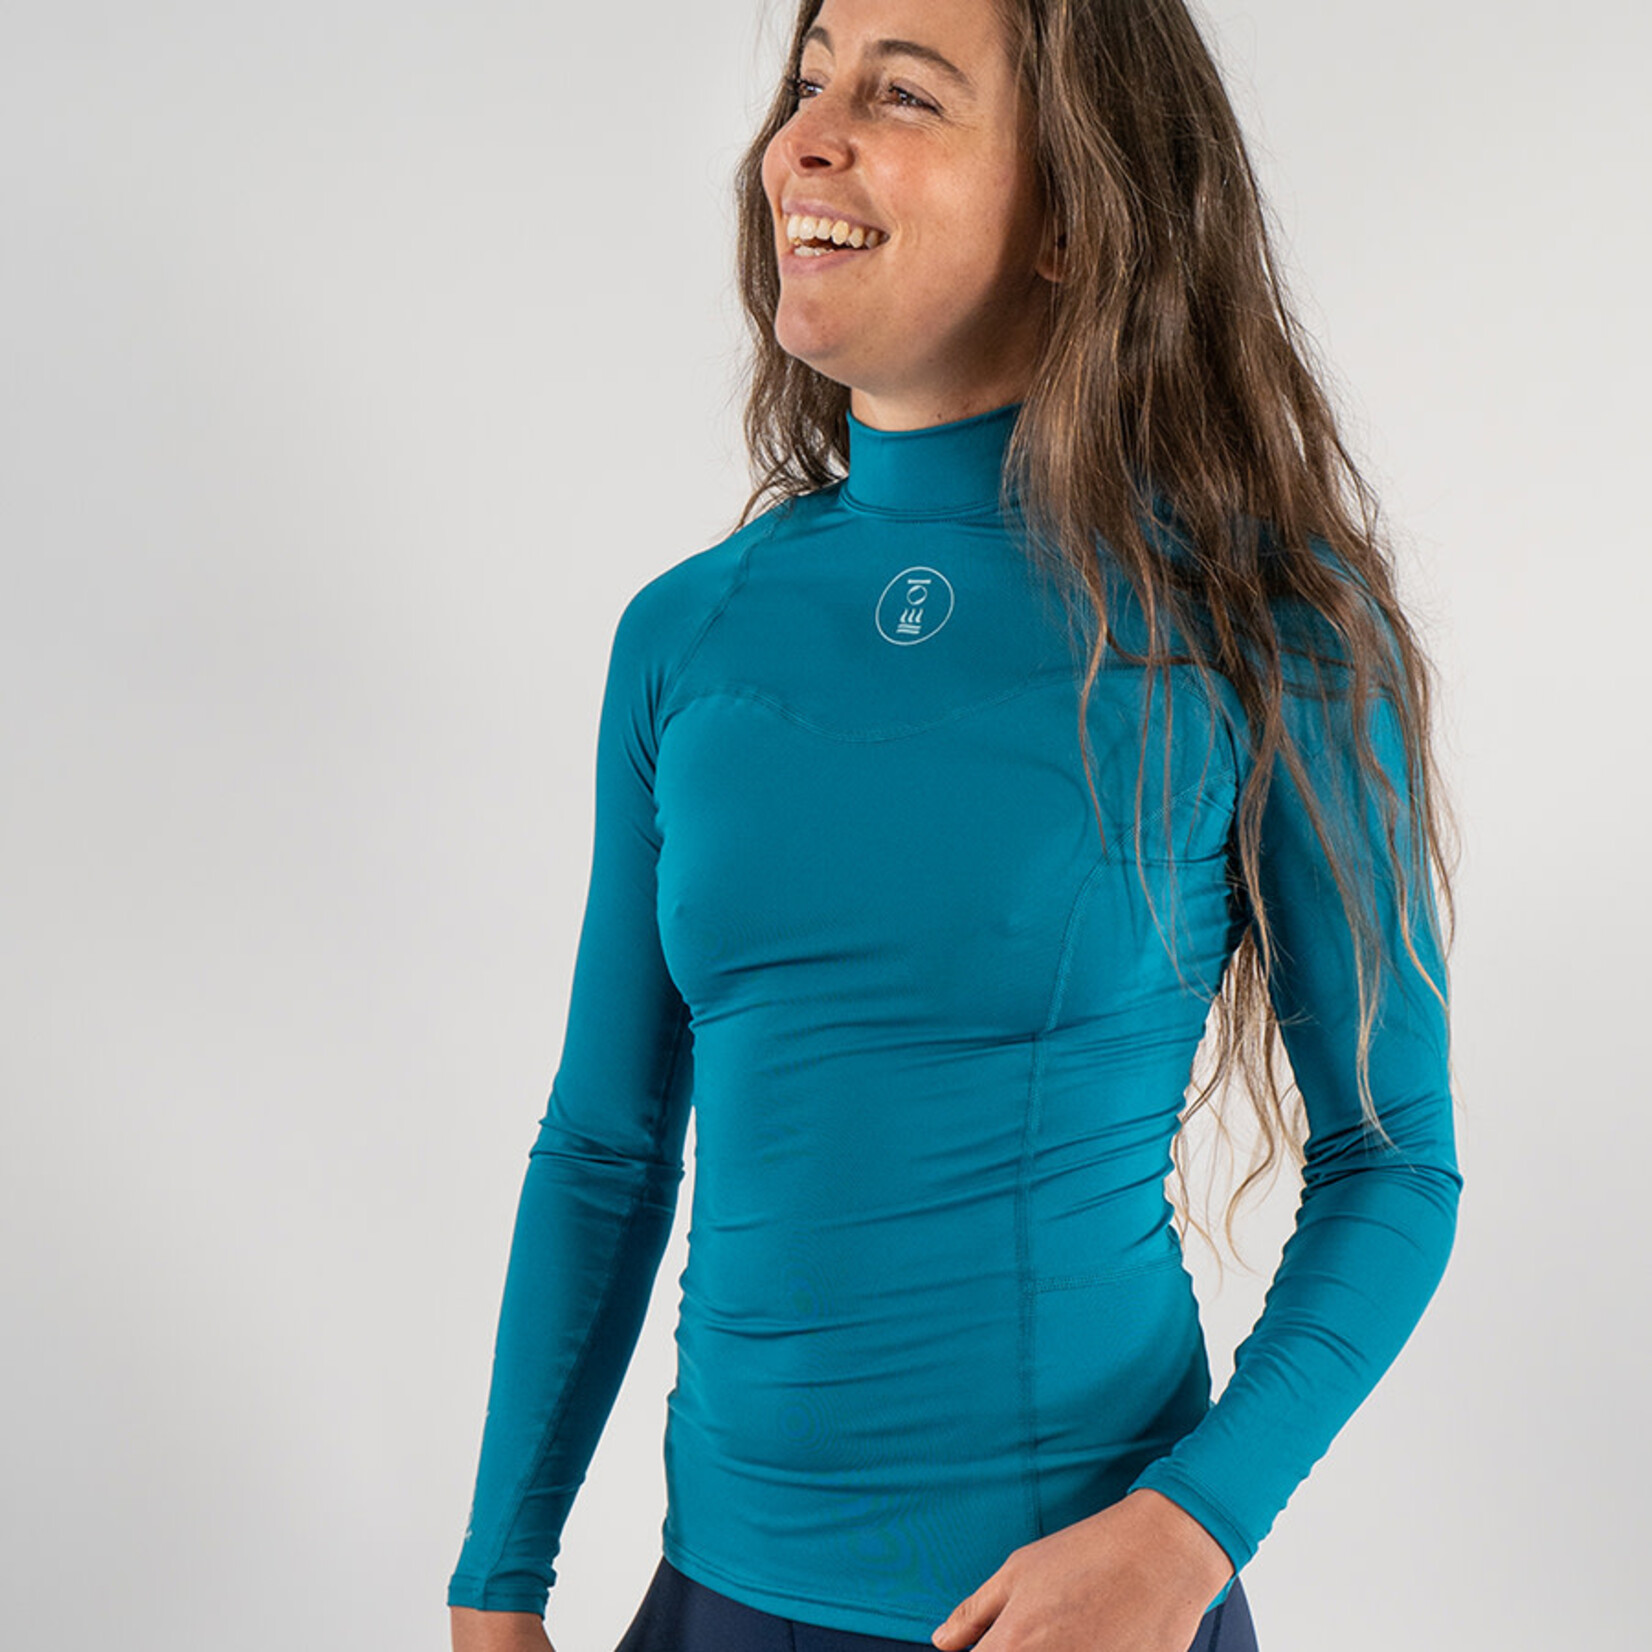 Fourth Element Hydroskin Long Sleeve Top Womens